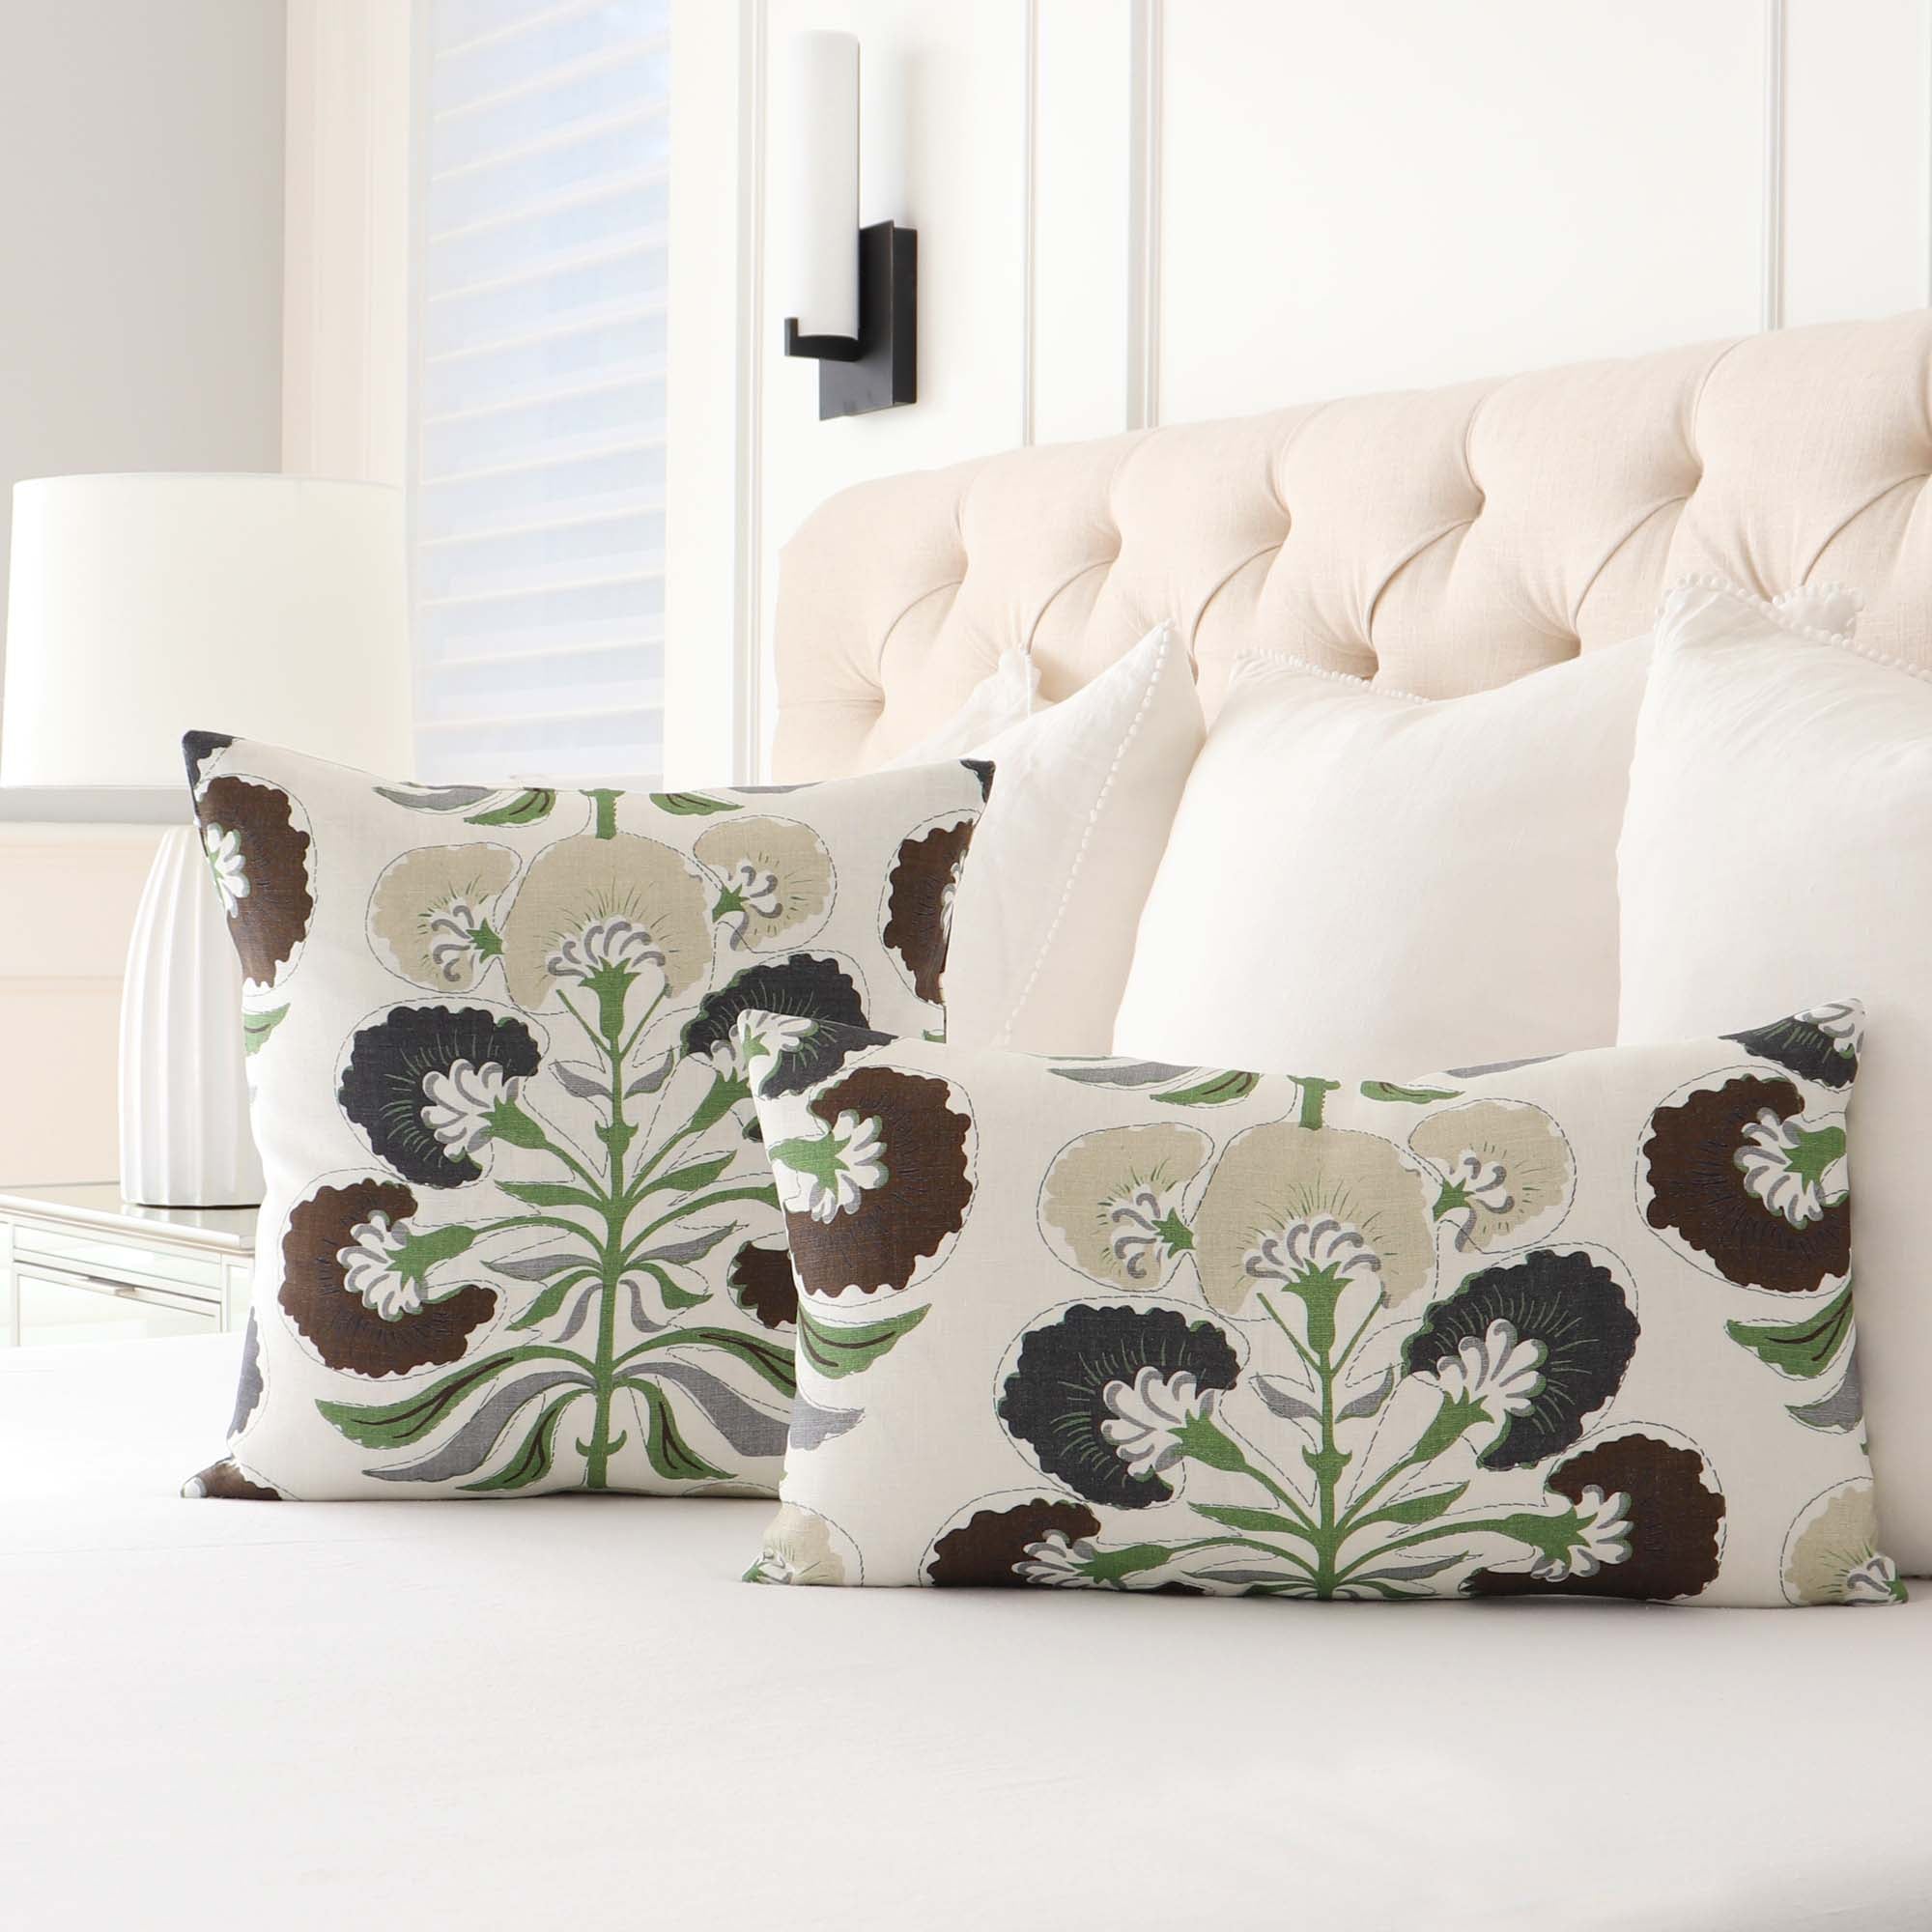 Thibaut Tybee Tree Black and Green Floral Block Print Designer Linen Luxury Decorative Throw Pillow Cover in Bedroom